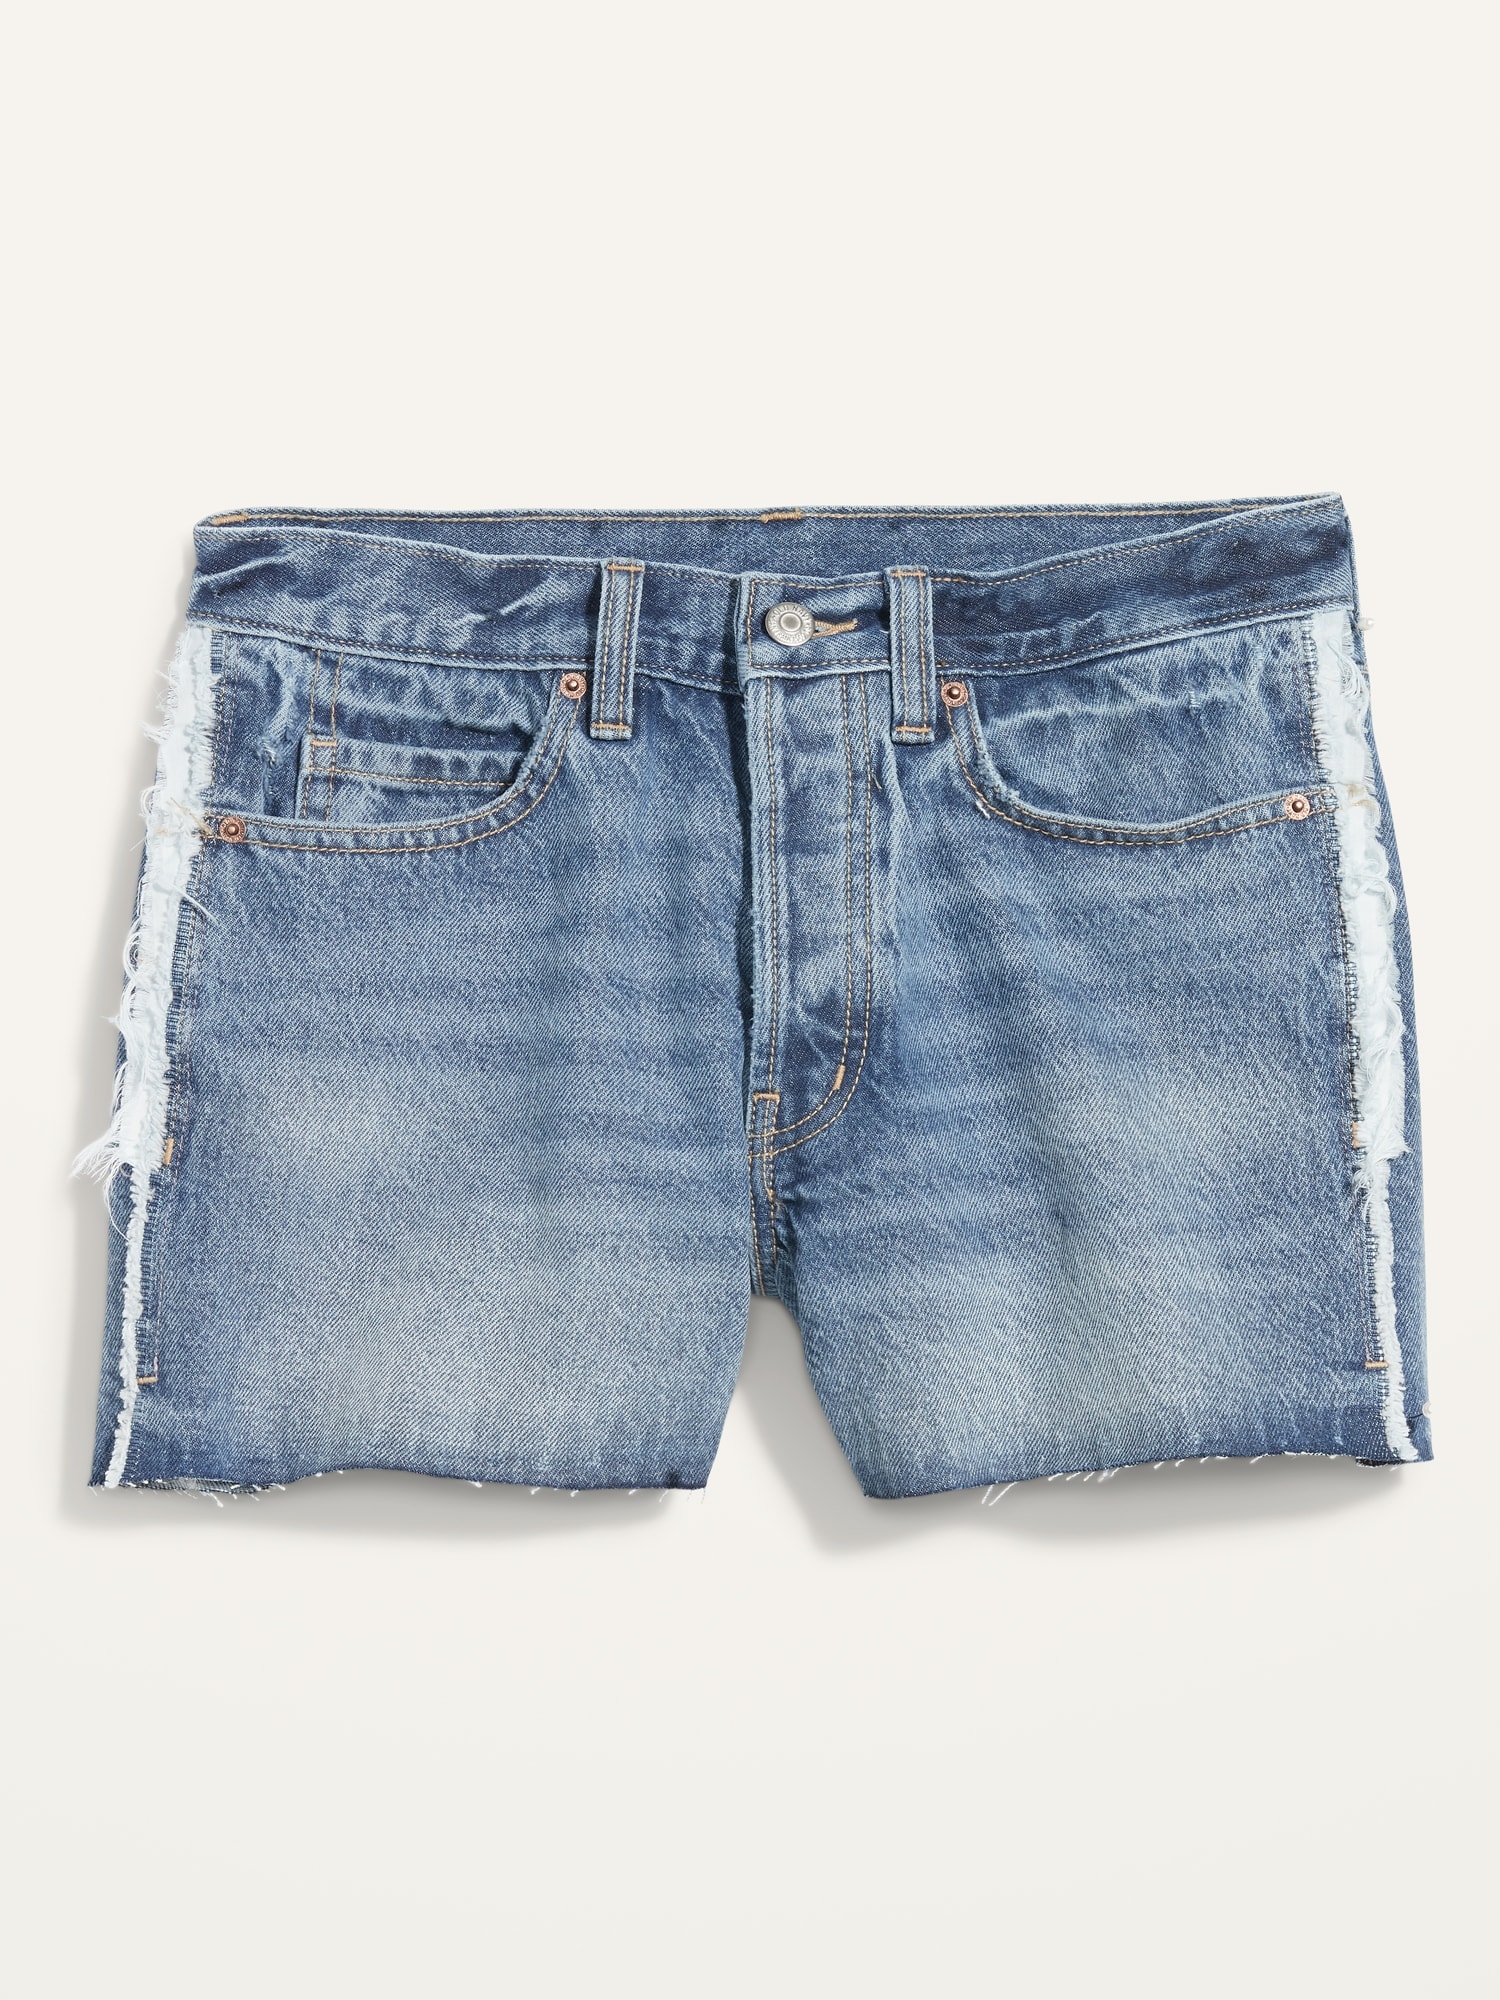 Higher High-Waisted Button-Fly Sky-Hi A-Line Non-Stretch Cut-Off Jean Shorts  for Women -- 3-inch inseam